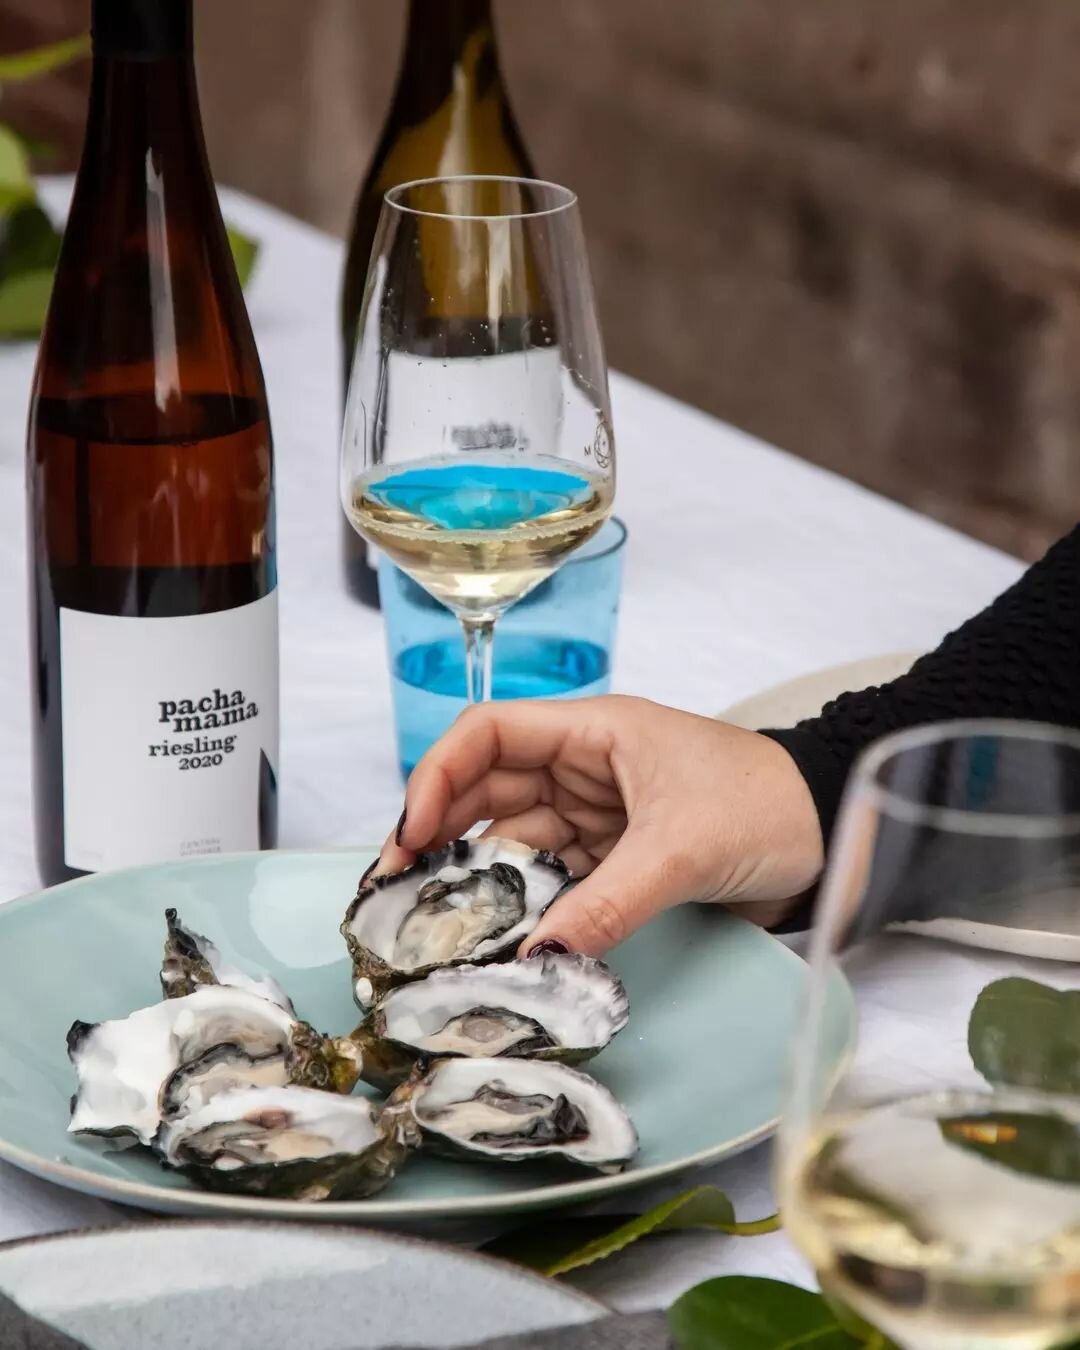 There might be more famous pairings but there is a lesser known match that we think is well worth experimenting with &ndash; Oysters and Riesling!
​
​Pacha Mama Riesling is lush and full of citrus with a minerality with a refreshing finish &ndash; we